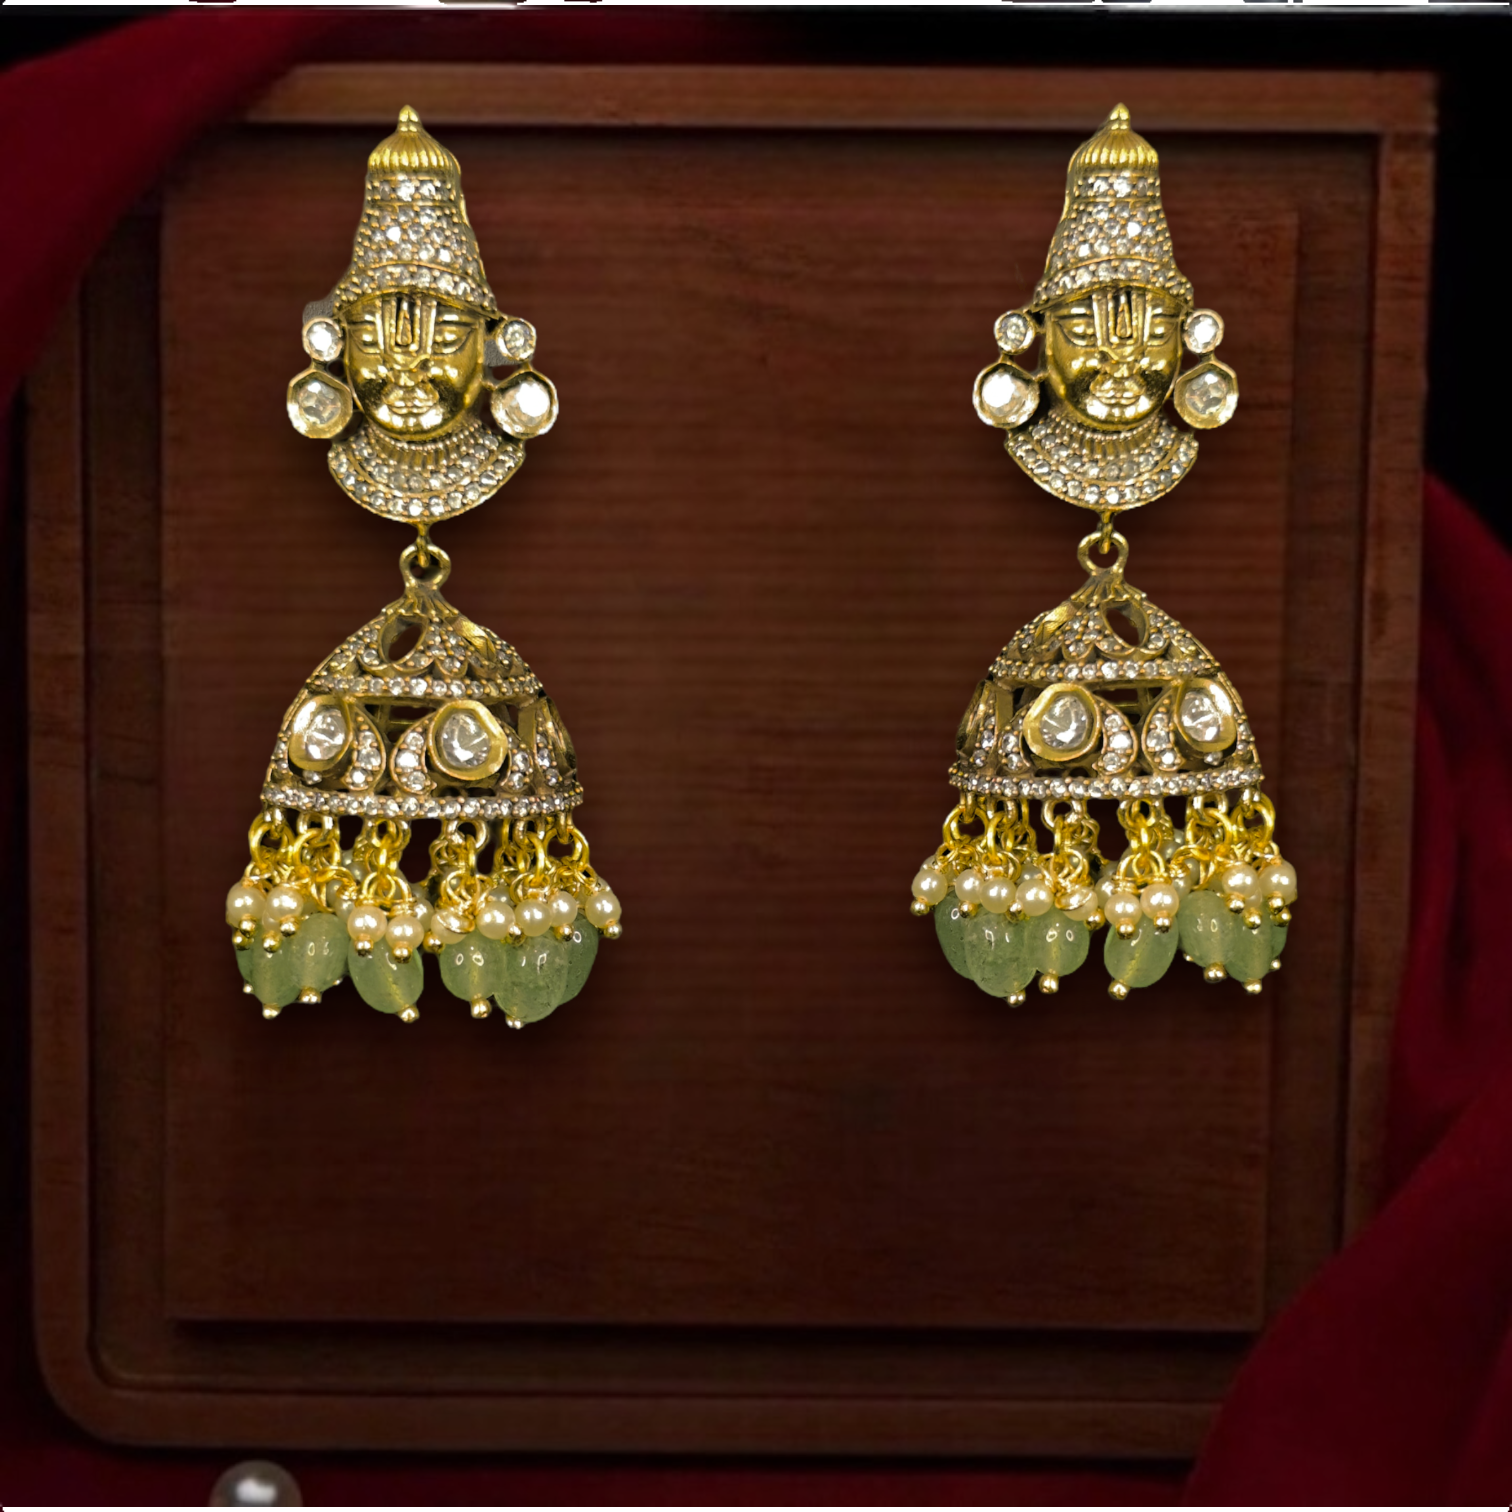 Lord Balaji Victorian Jhumka with Russian Beads. This product comes under victorian jewellery